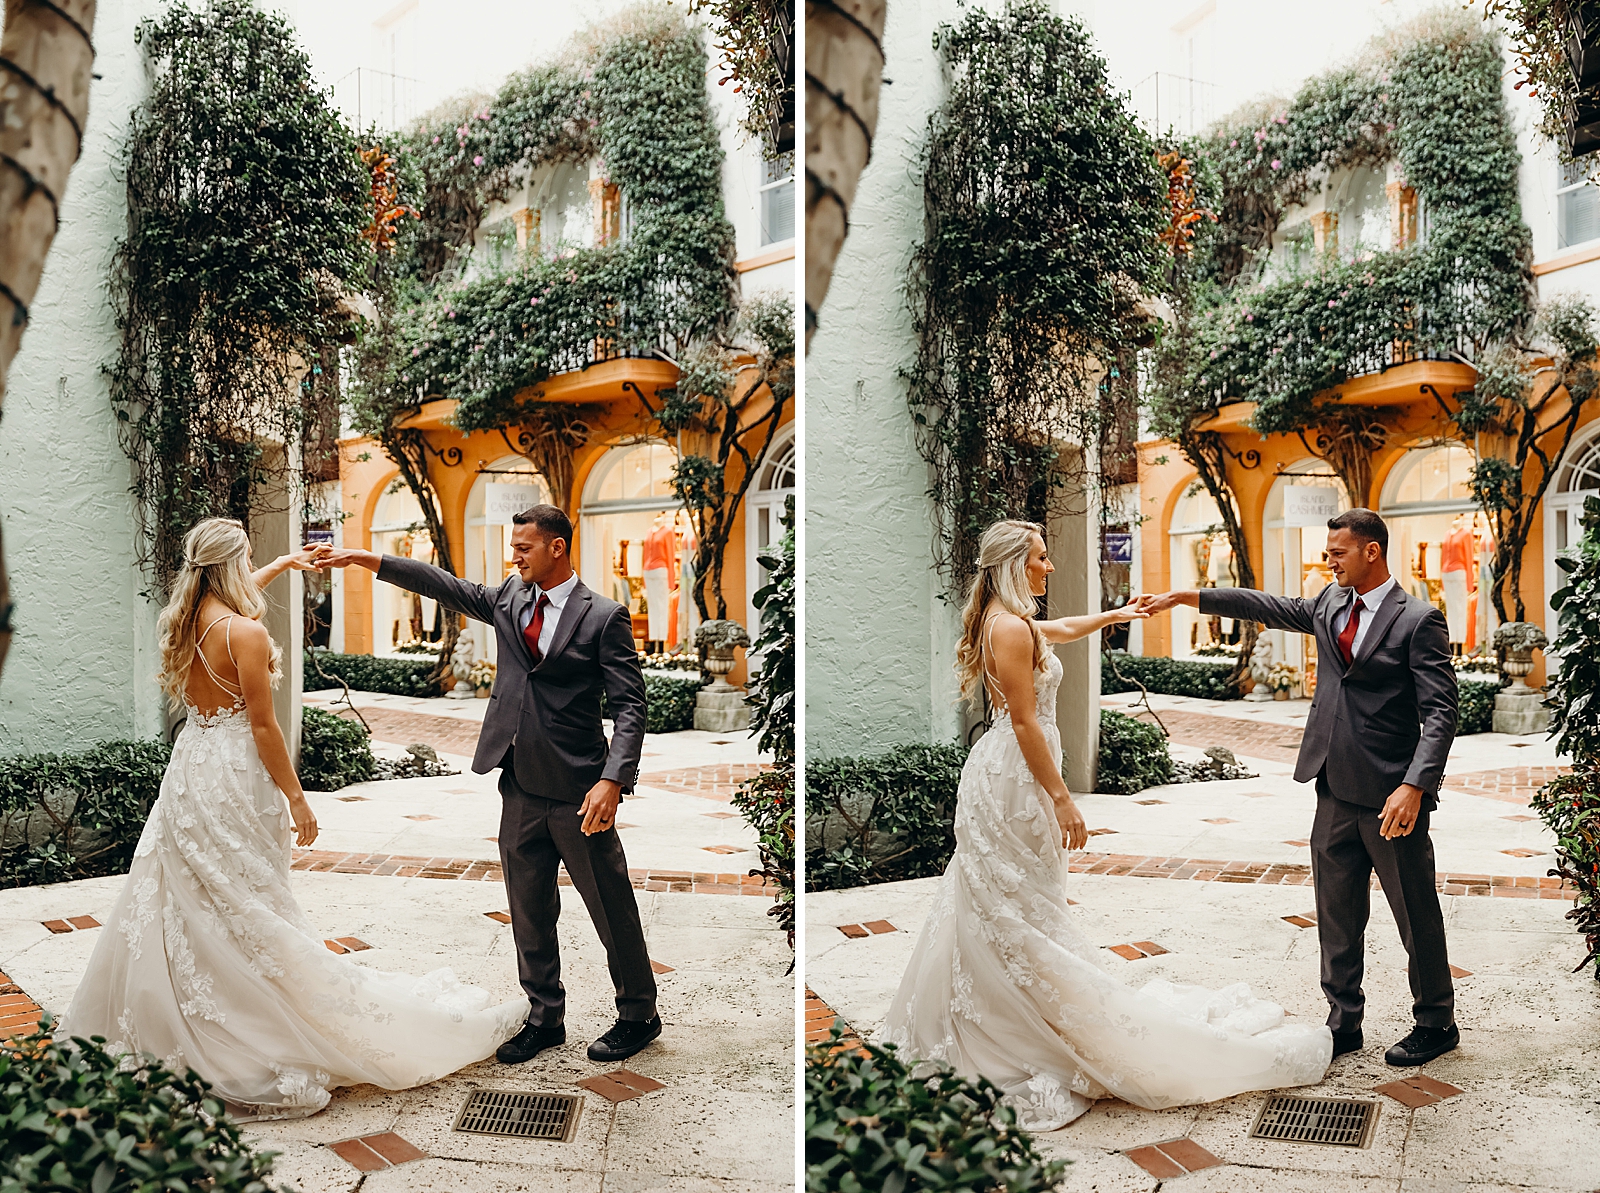 Couple pirouetting in courtyard Worth Avenue Bridal Photography captured by South Florida Engagement Photographer Maggie Alvarez Photography